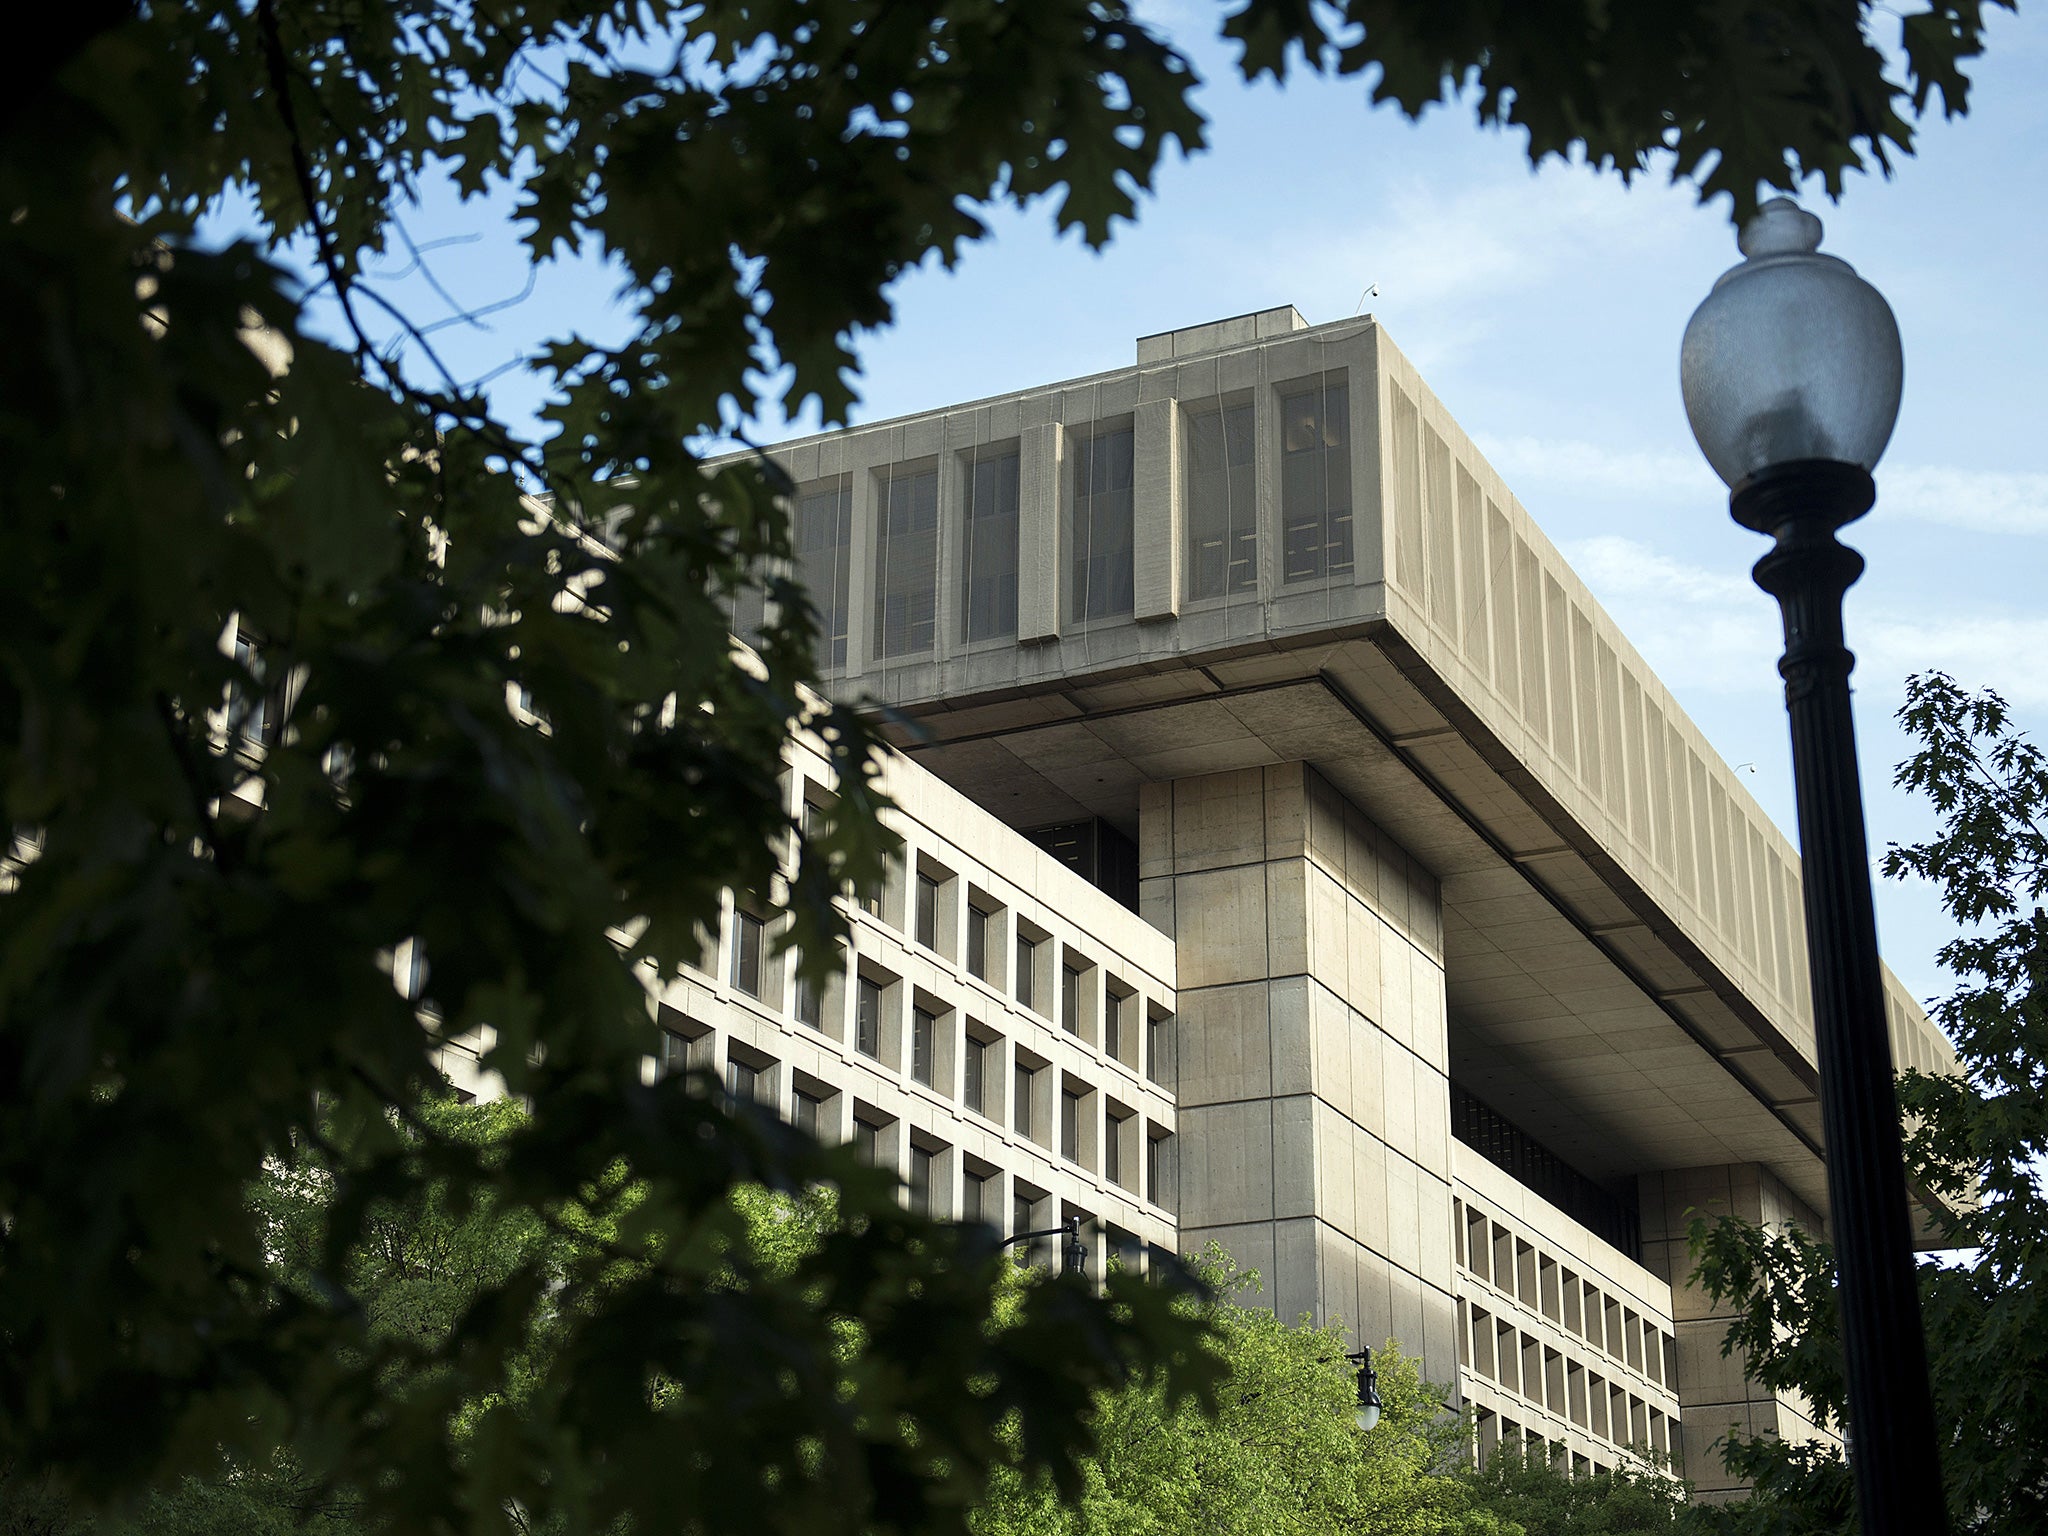 The J. Edgar Hoover Building, the headquarters for the Federal Bureau of Investigation (FBI)